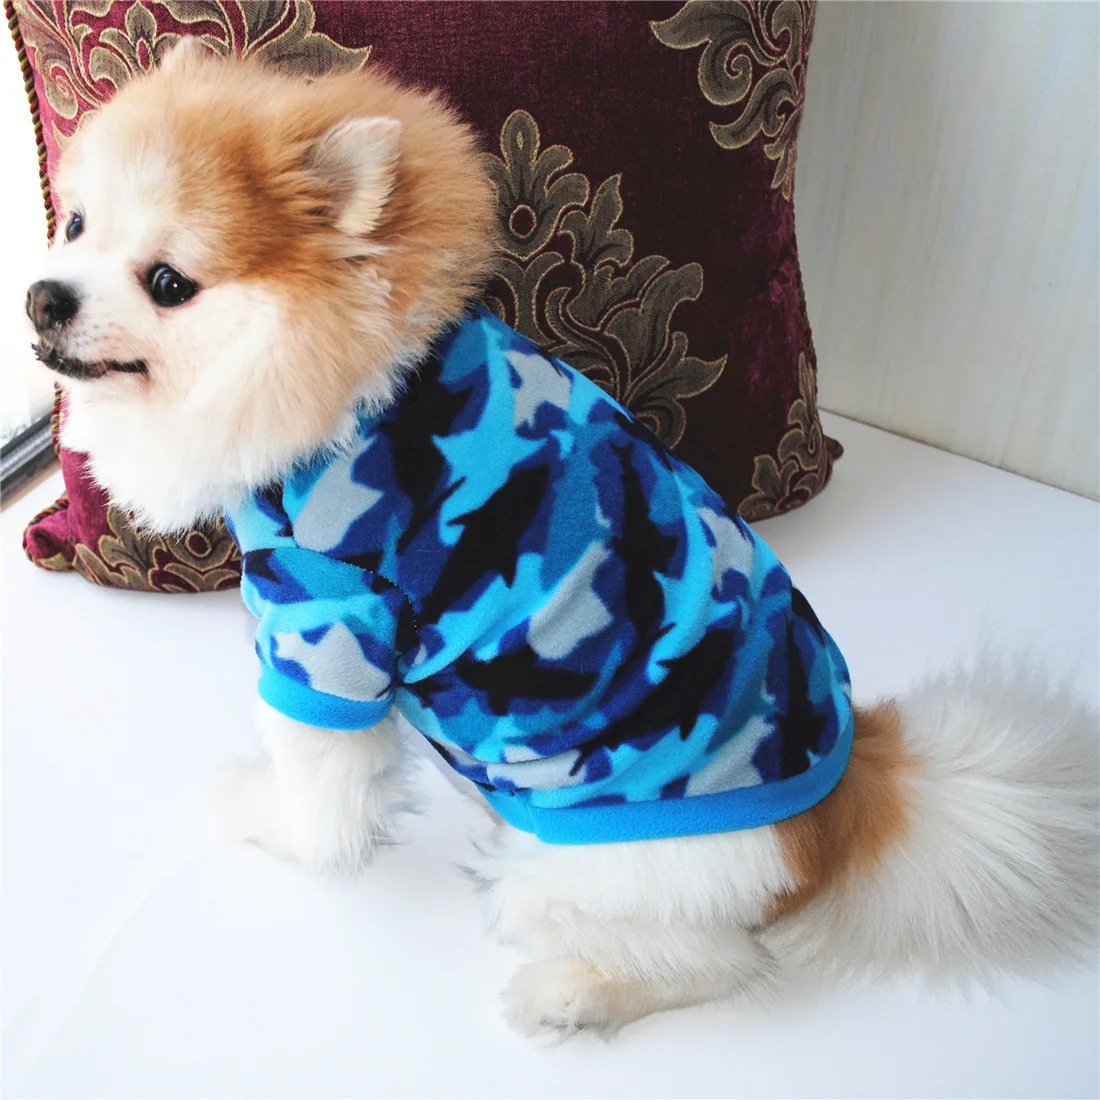 Unique Sweaters For Dogs - The Popular Clothes This Winter